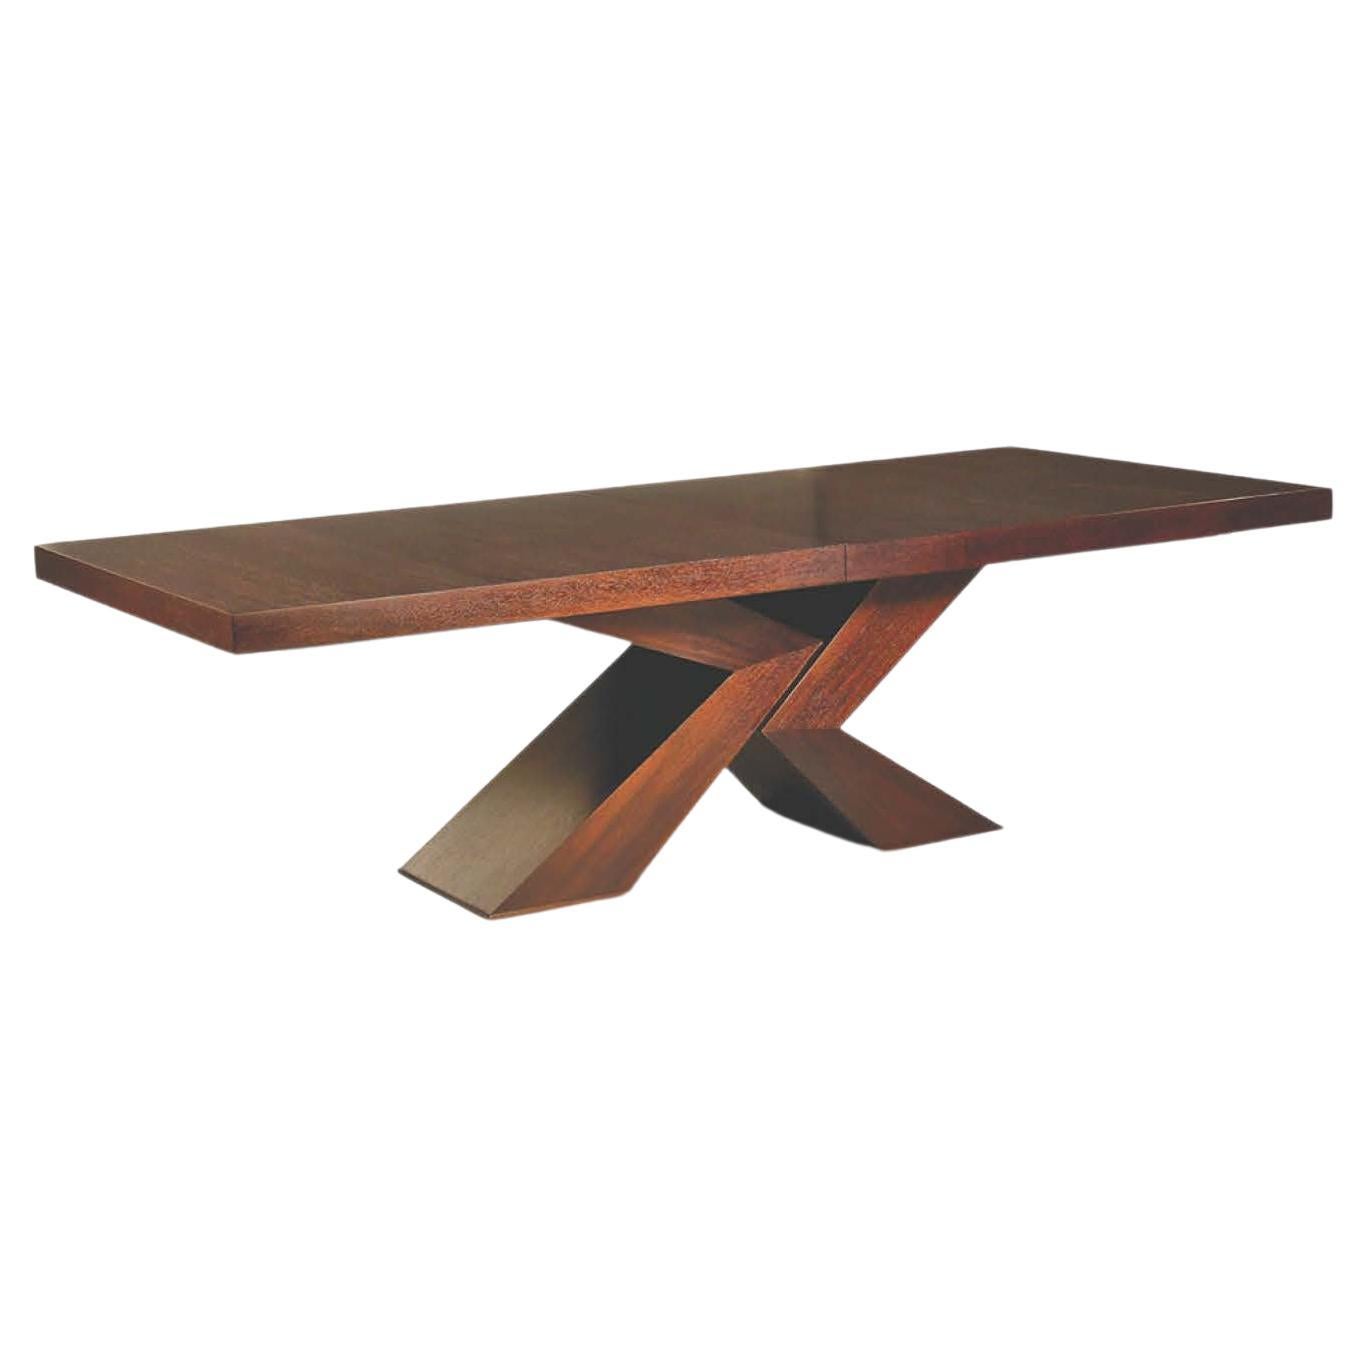 Brace Dining Table with Sculptural Table Base Shown in Chestnut Brown Mahogany 